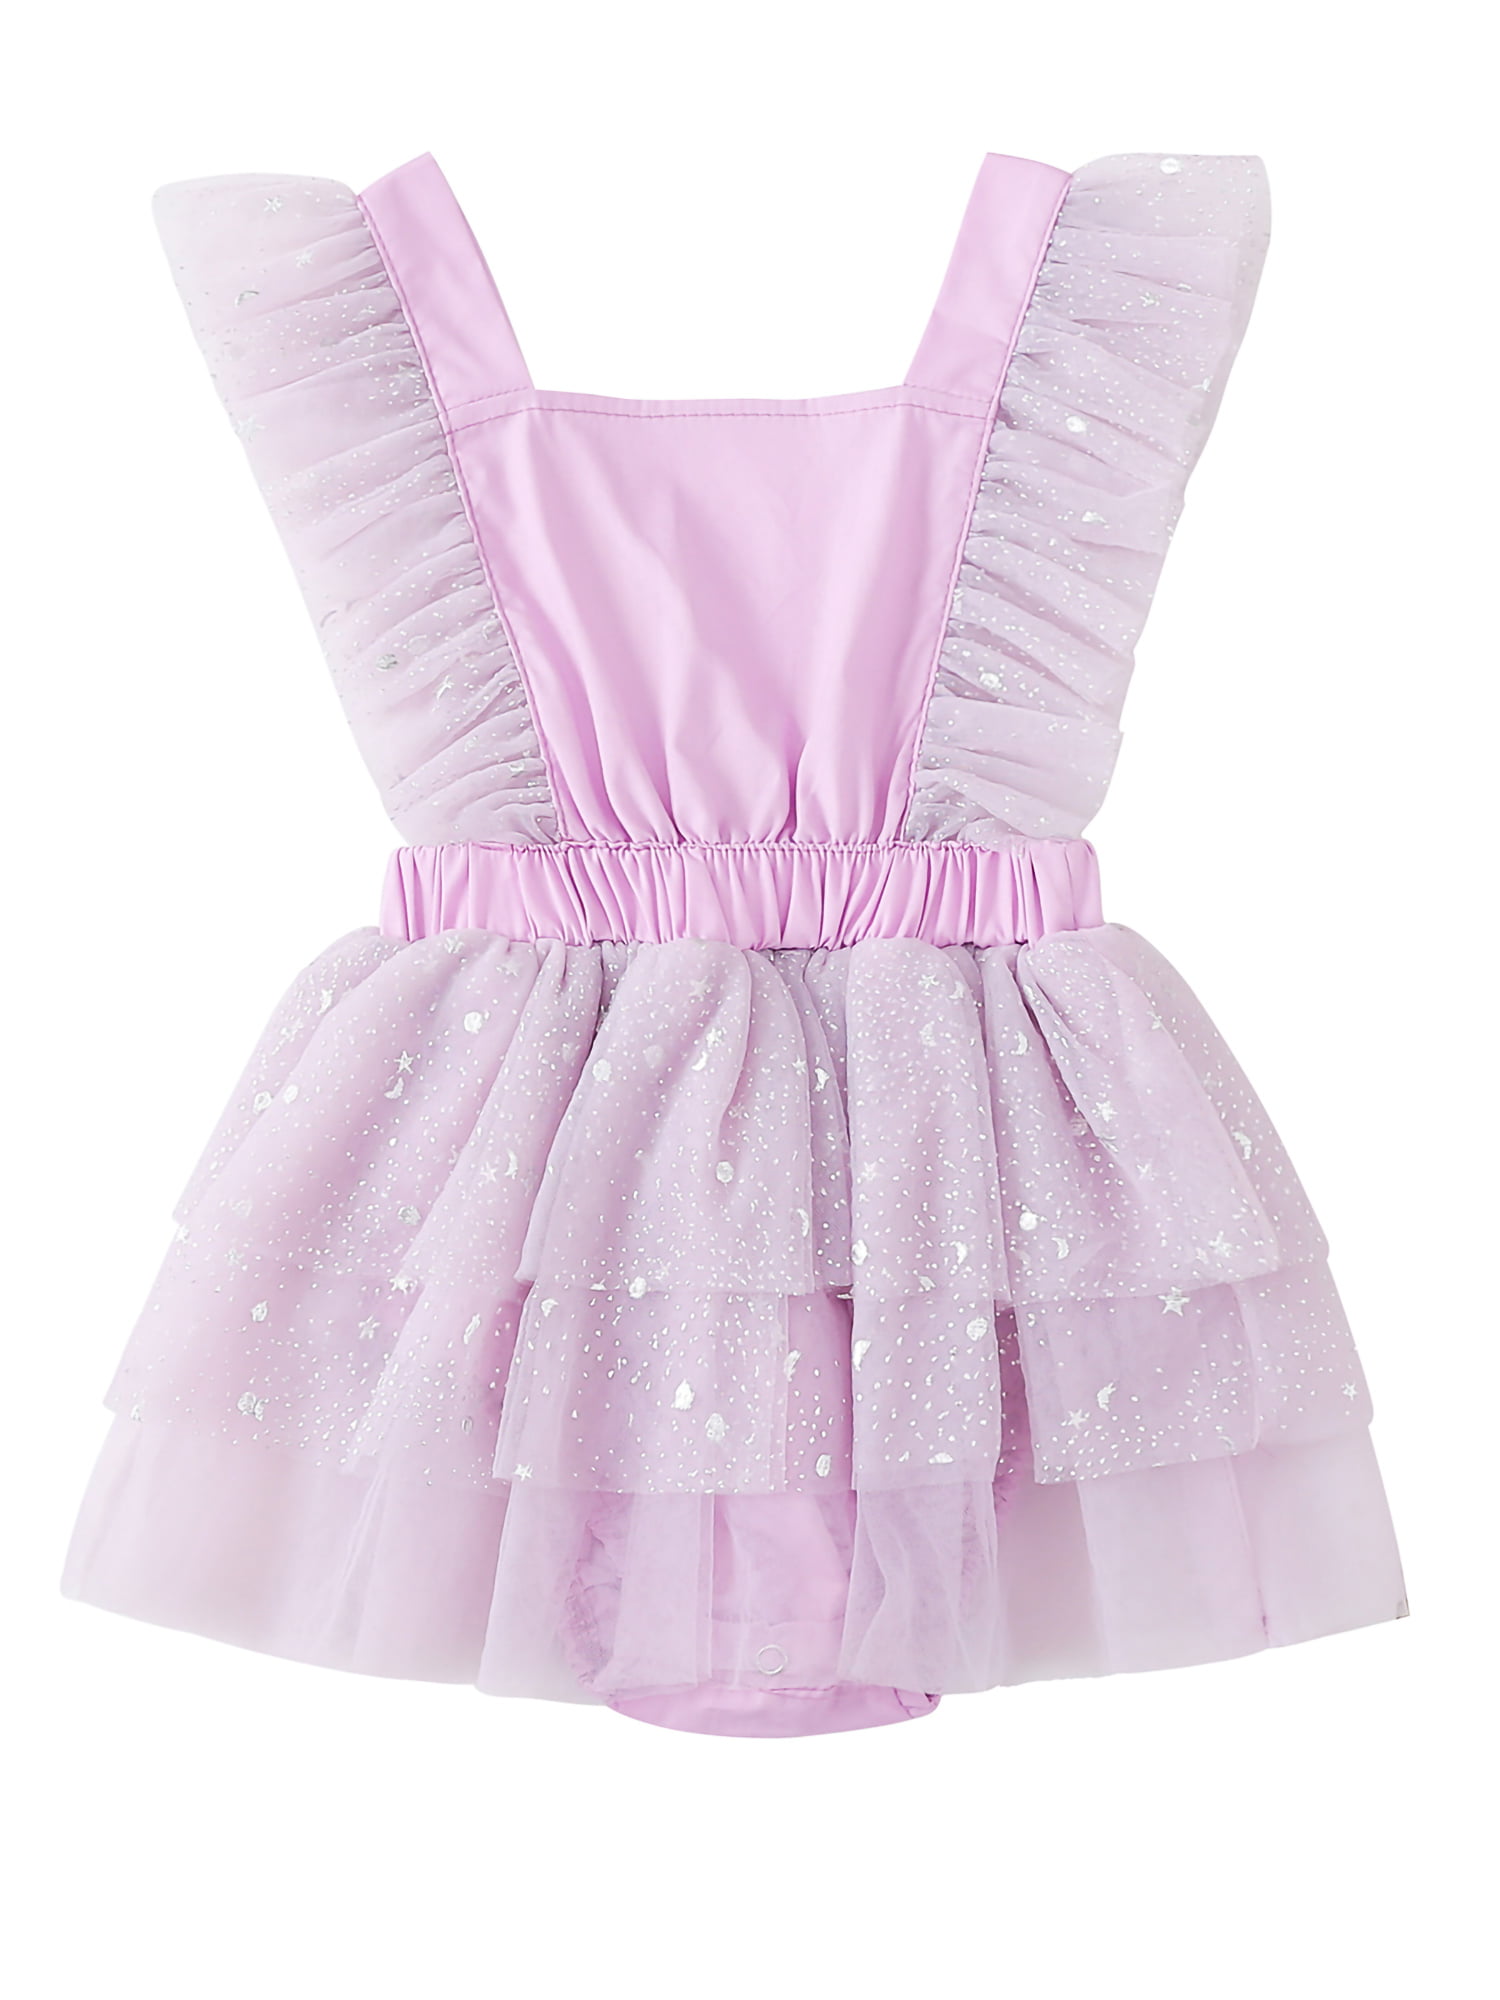 Baby Gap Purple Double layer tulle one-piece Romper Baby Girls size 6 9 12 18 24 